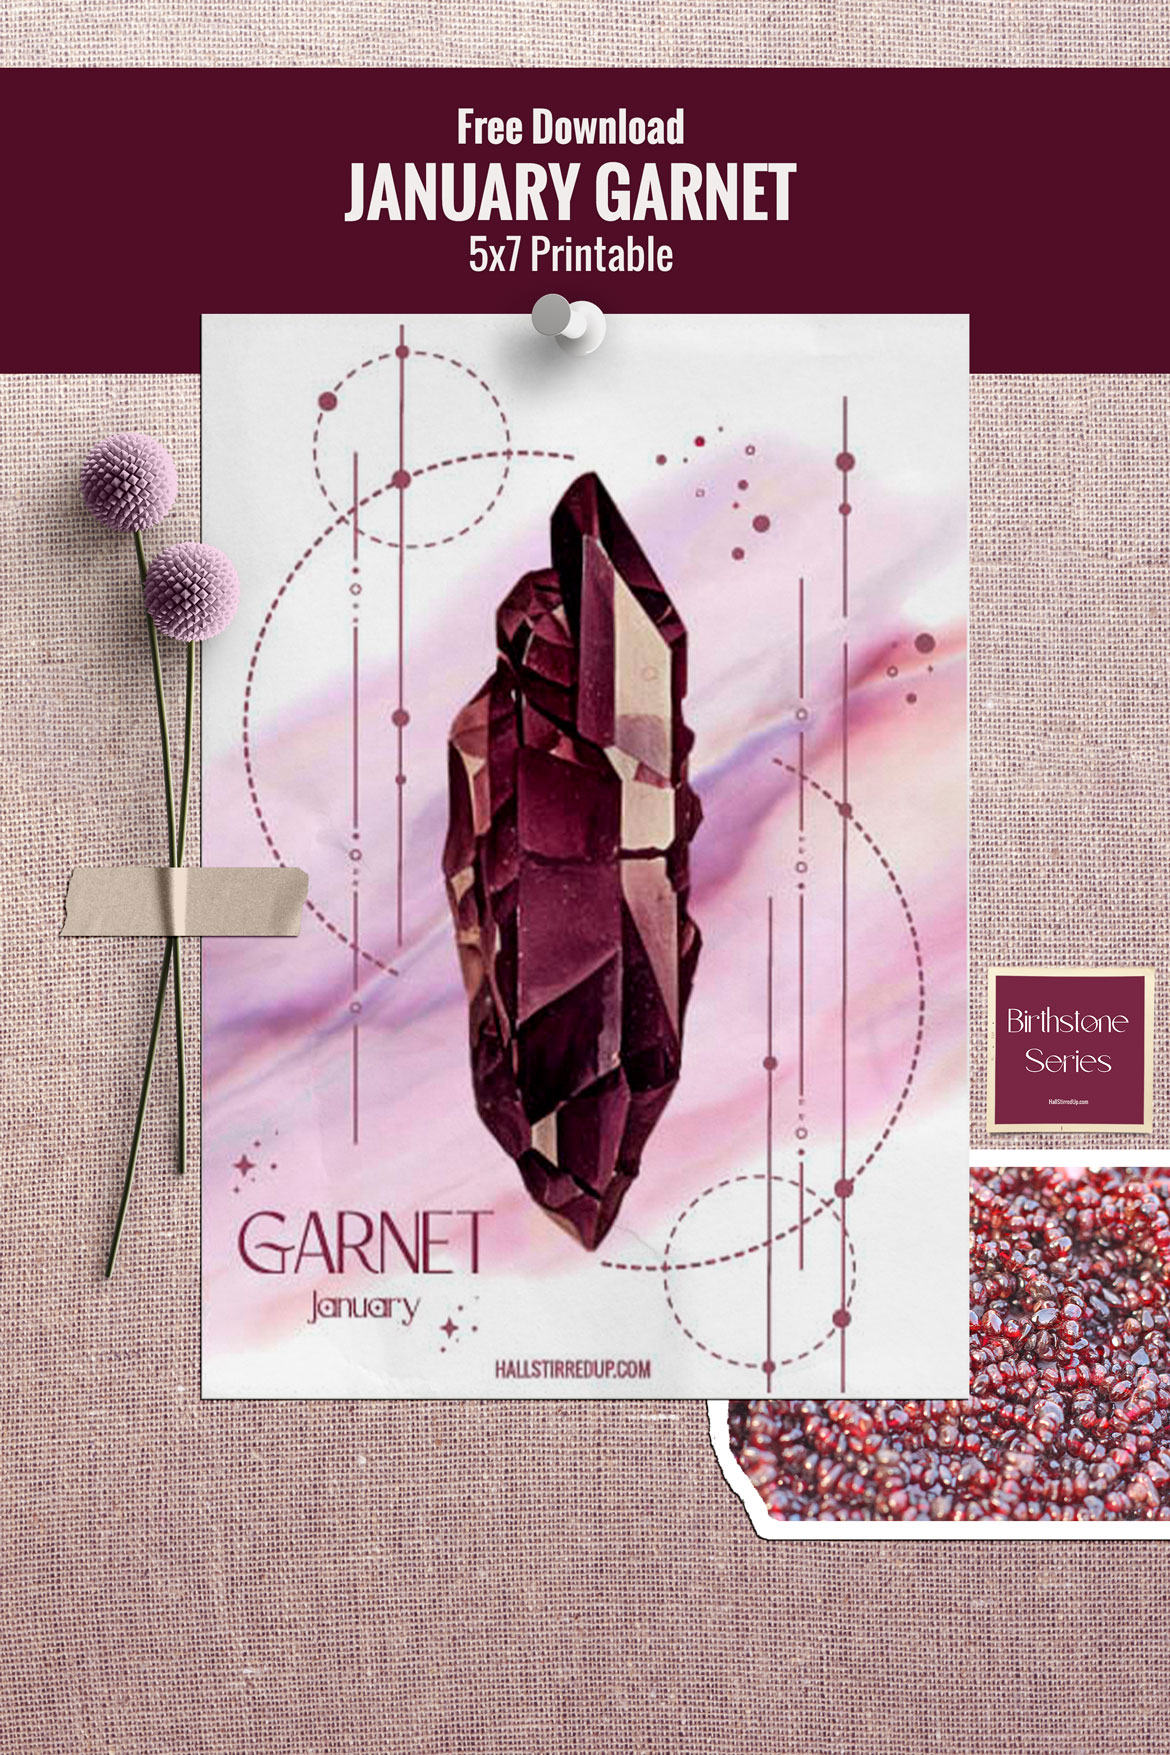 January's birthstone is the beautiful garnet - new series and free printable